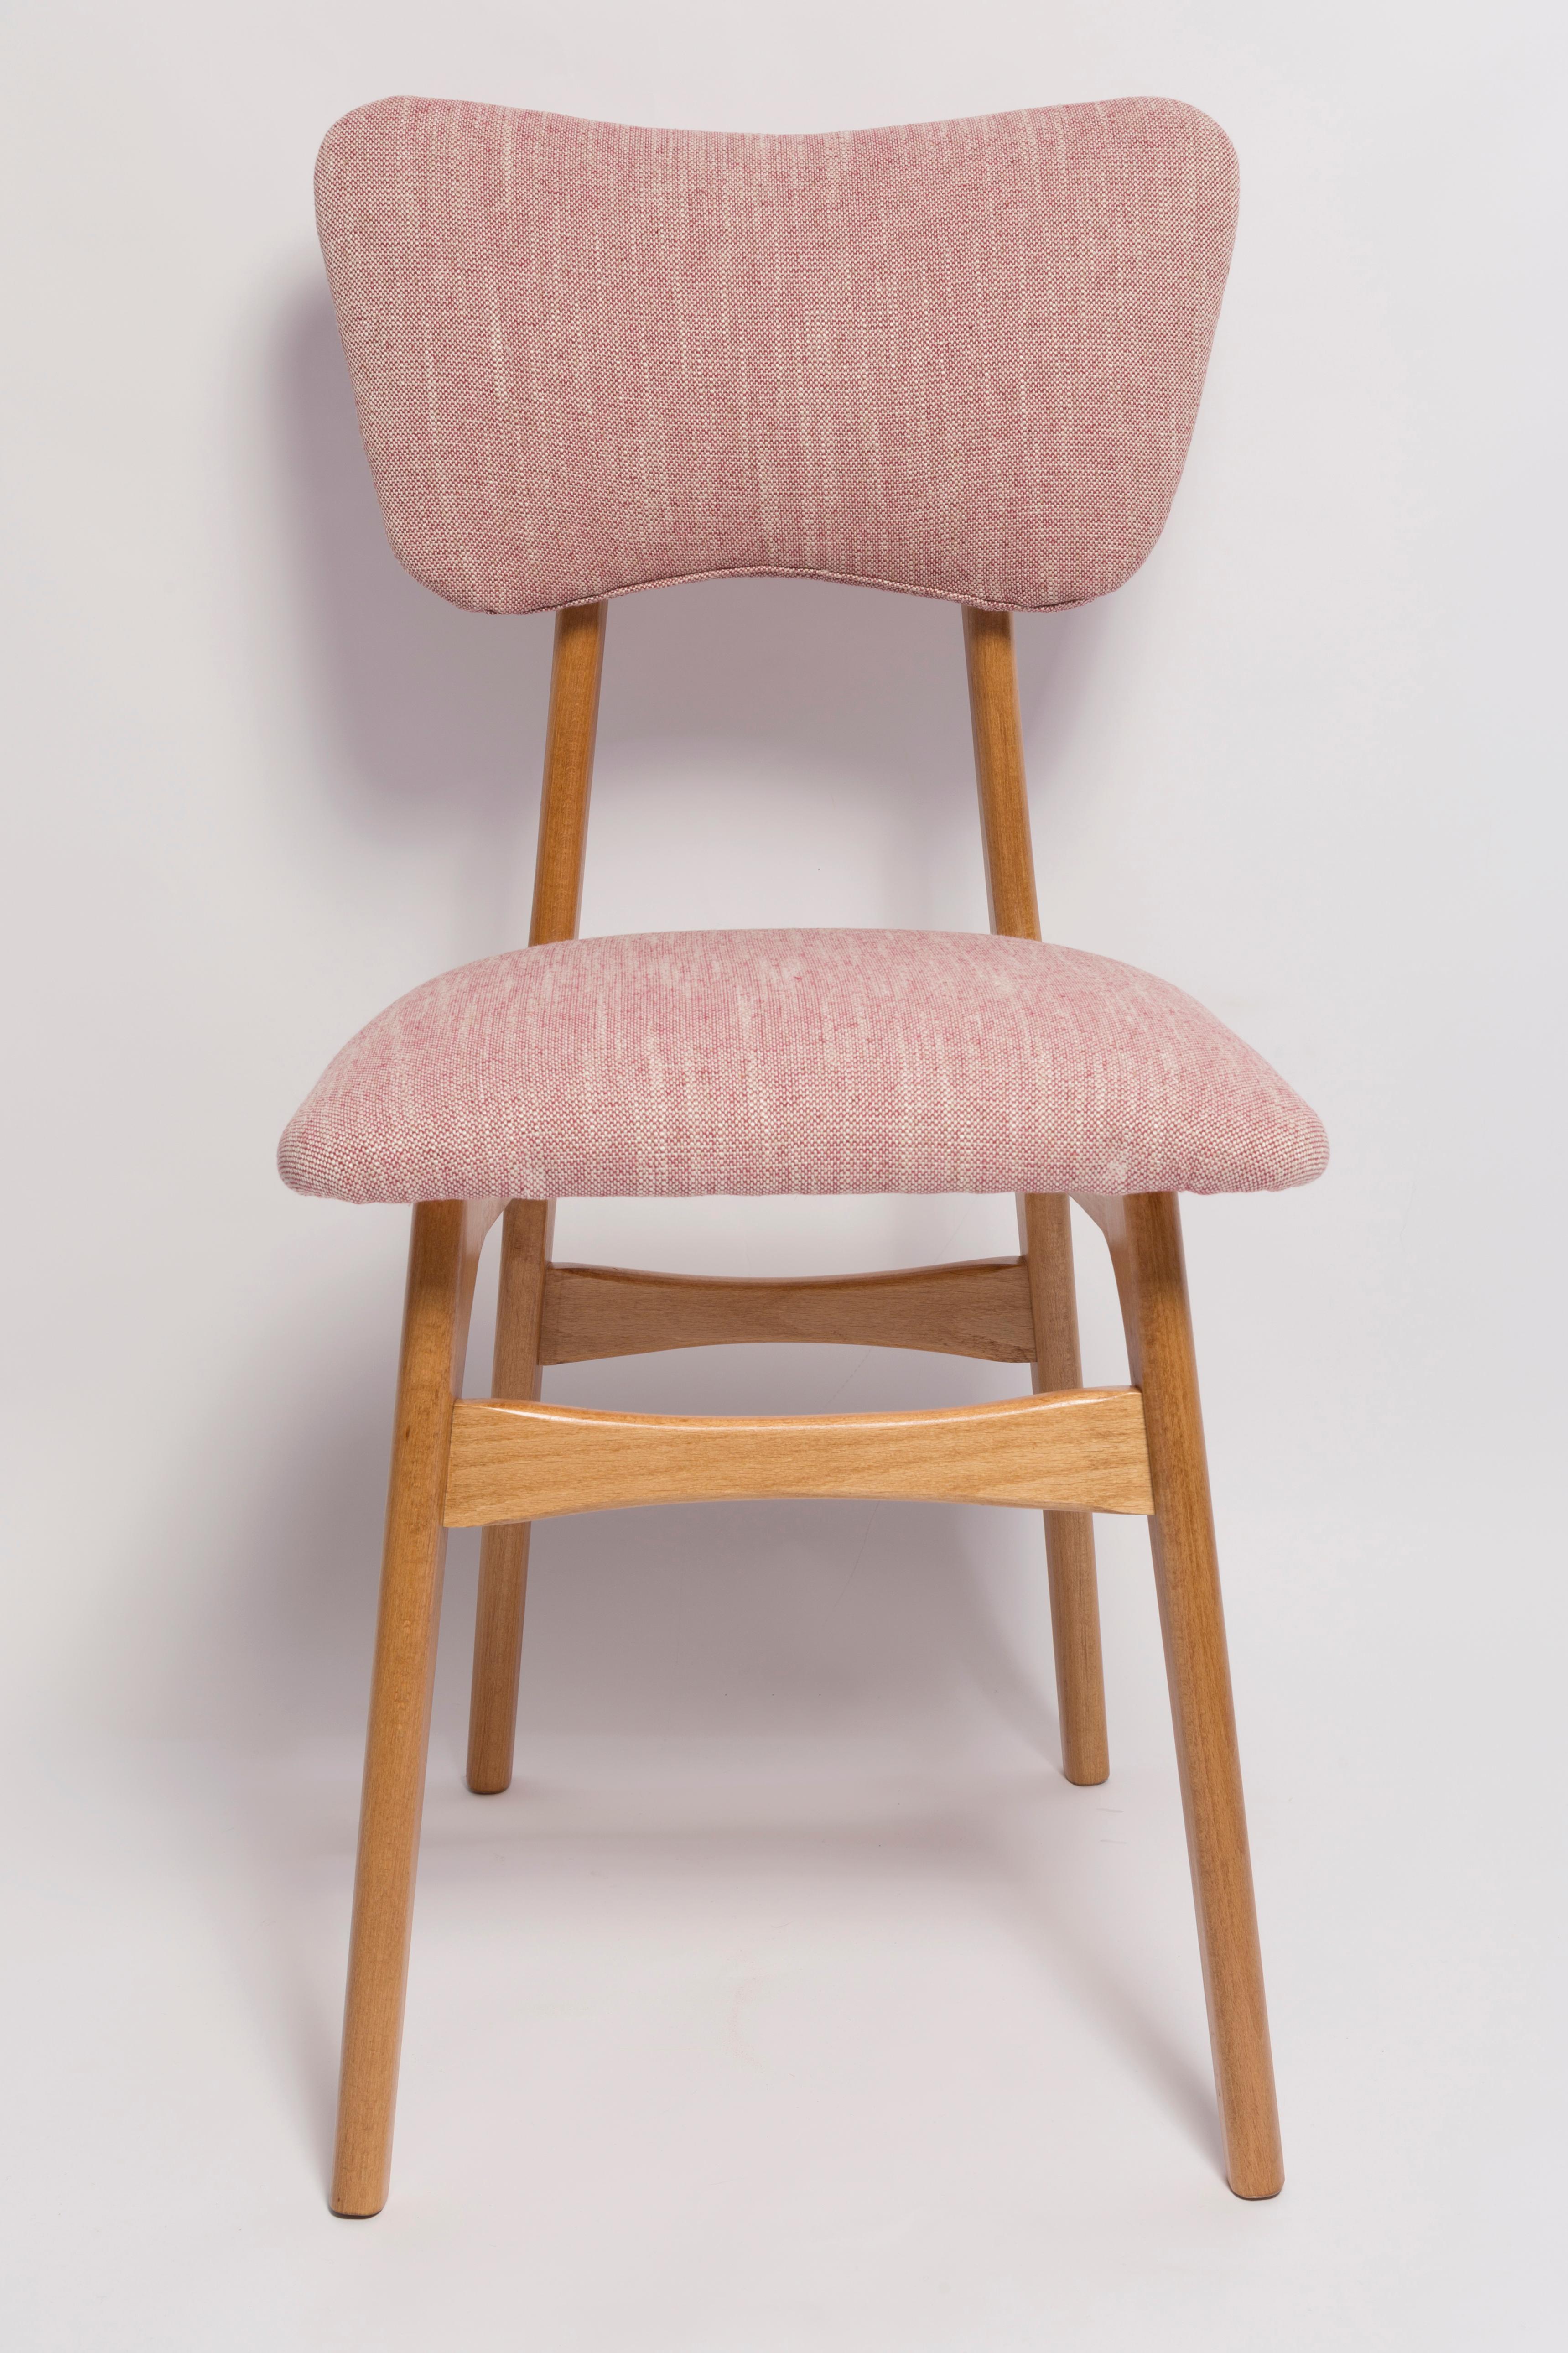 Six Mid-Century Butterfly Dining Chairs, Pink Linen, Light Wood, Europe, 1960s For Sale 3